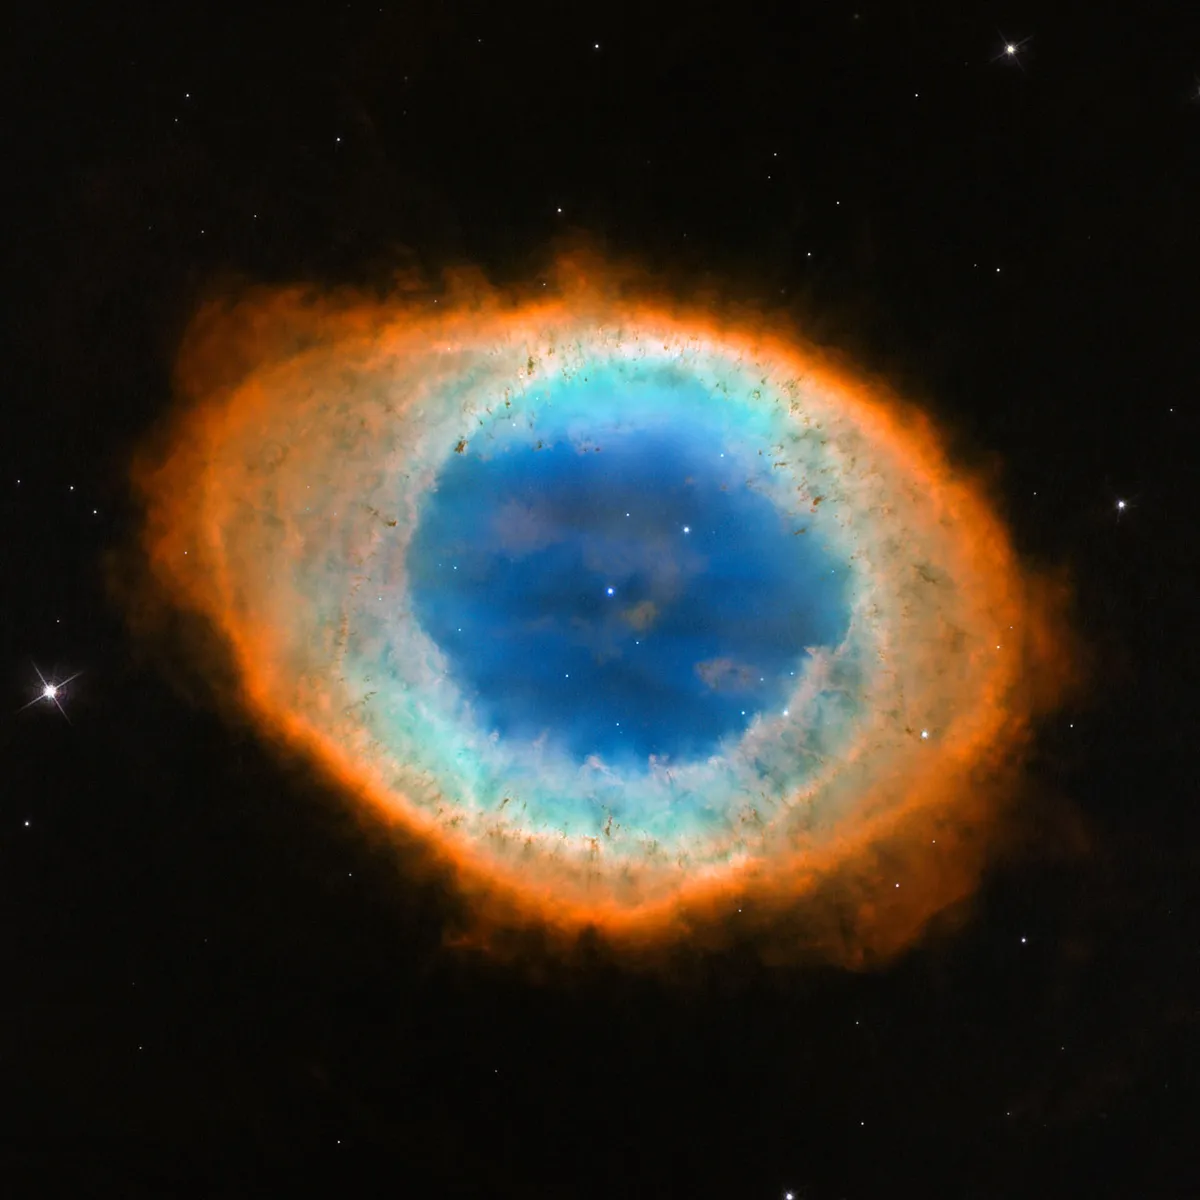 Hubble has helped to define the shape of the Ring Nebula, revealing it to be doughnut shaped, with lower density material at its core. Credit: Credits: NASA, ESA and the Hubble Heritage (STScI/AURA)-ESA/Hubble Collaboration